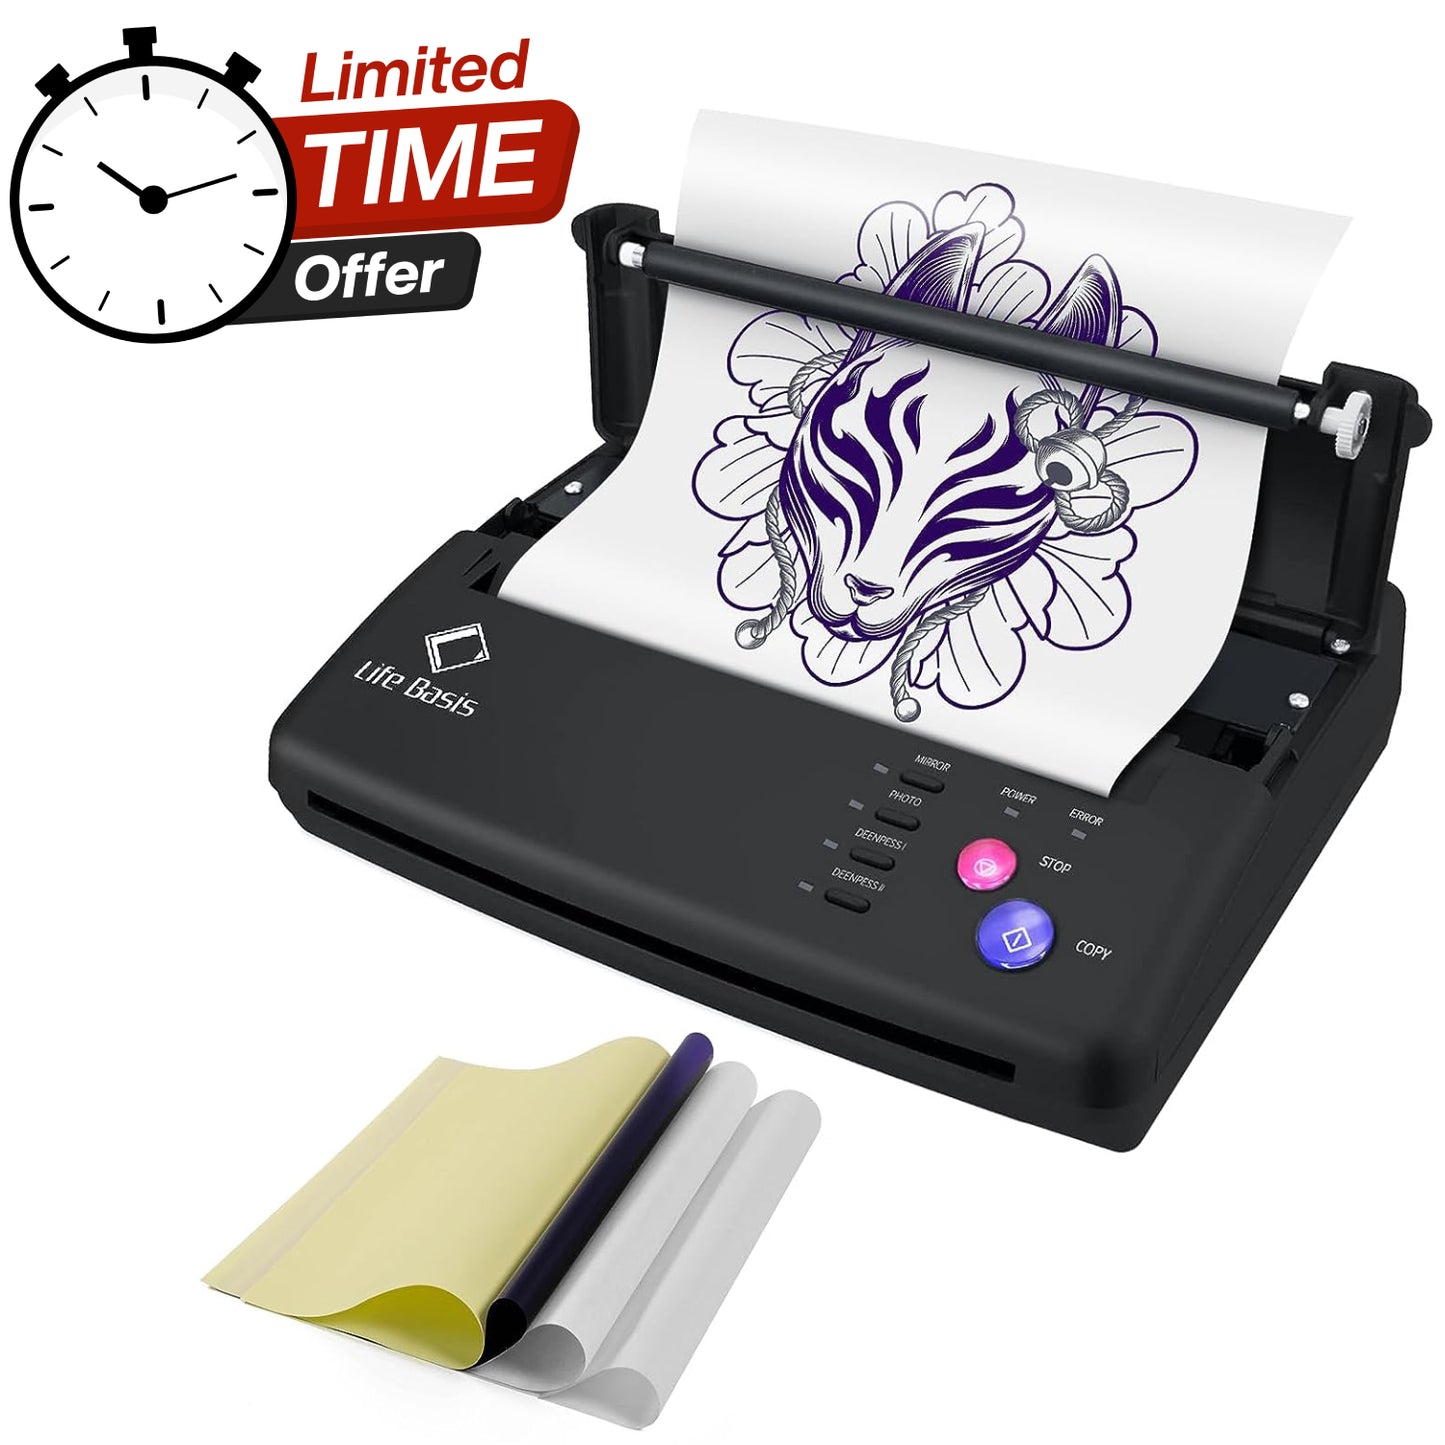 Can You Use a Regular Printer for Tattoo Transfer Paper